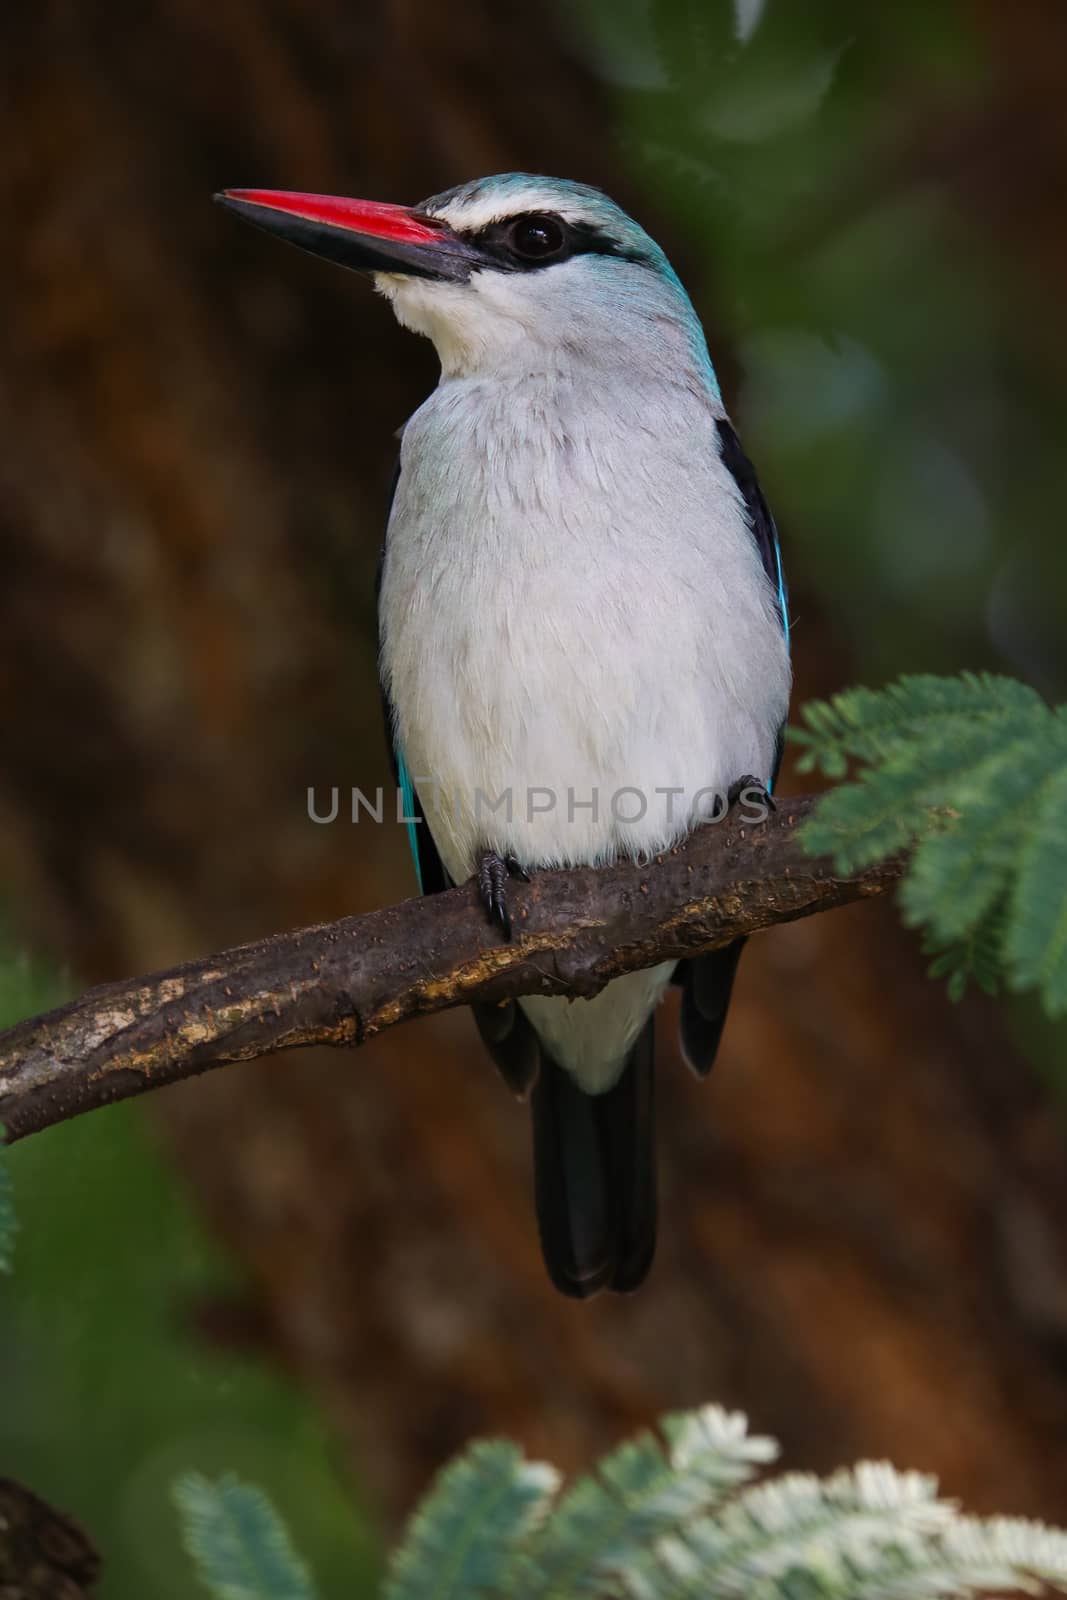 Woodland kingfisher bird (Halcyon senegalensis) perched on acacia tree branch, Pretoria, South Africa